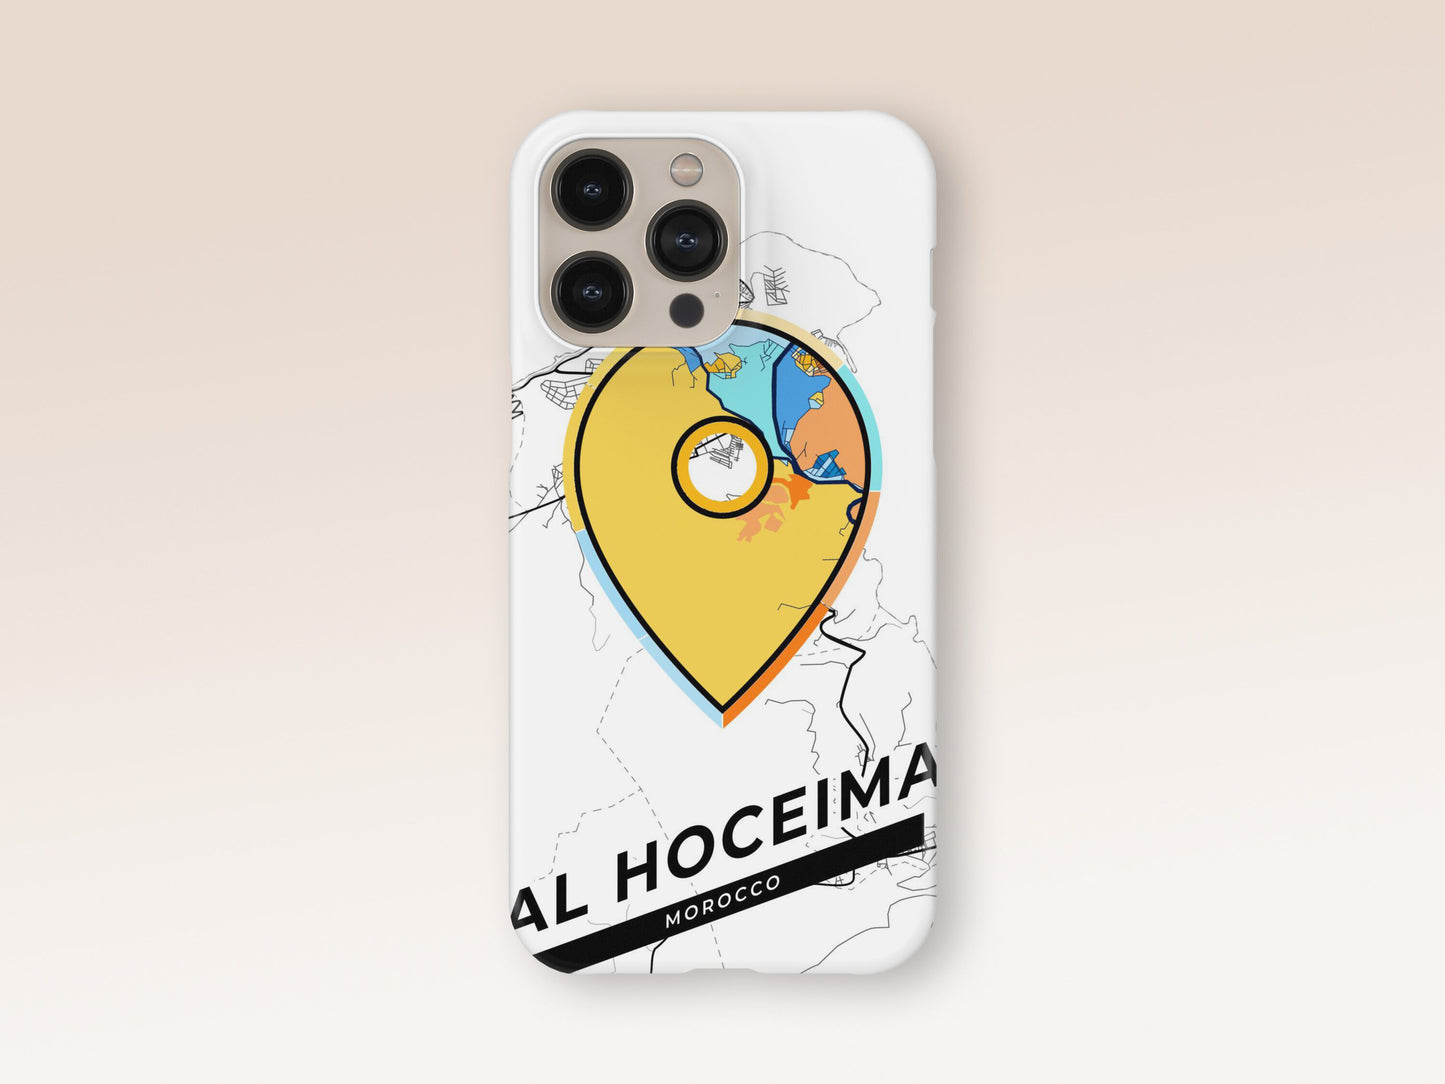 Al Hoceima Morocco slim phone case with colorful icon. Birthday, wedding or housewarming gift. Couple match cases. 1